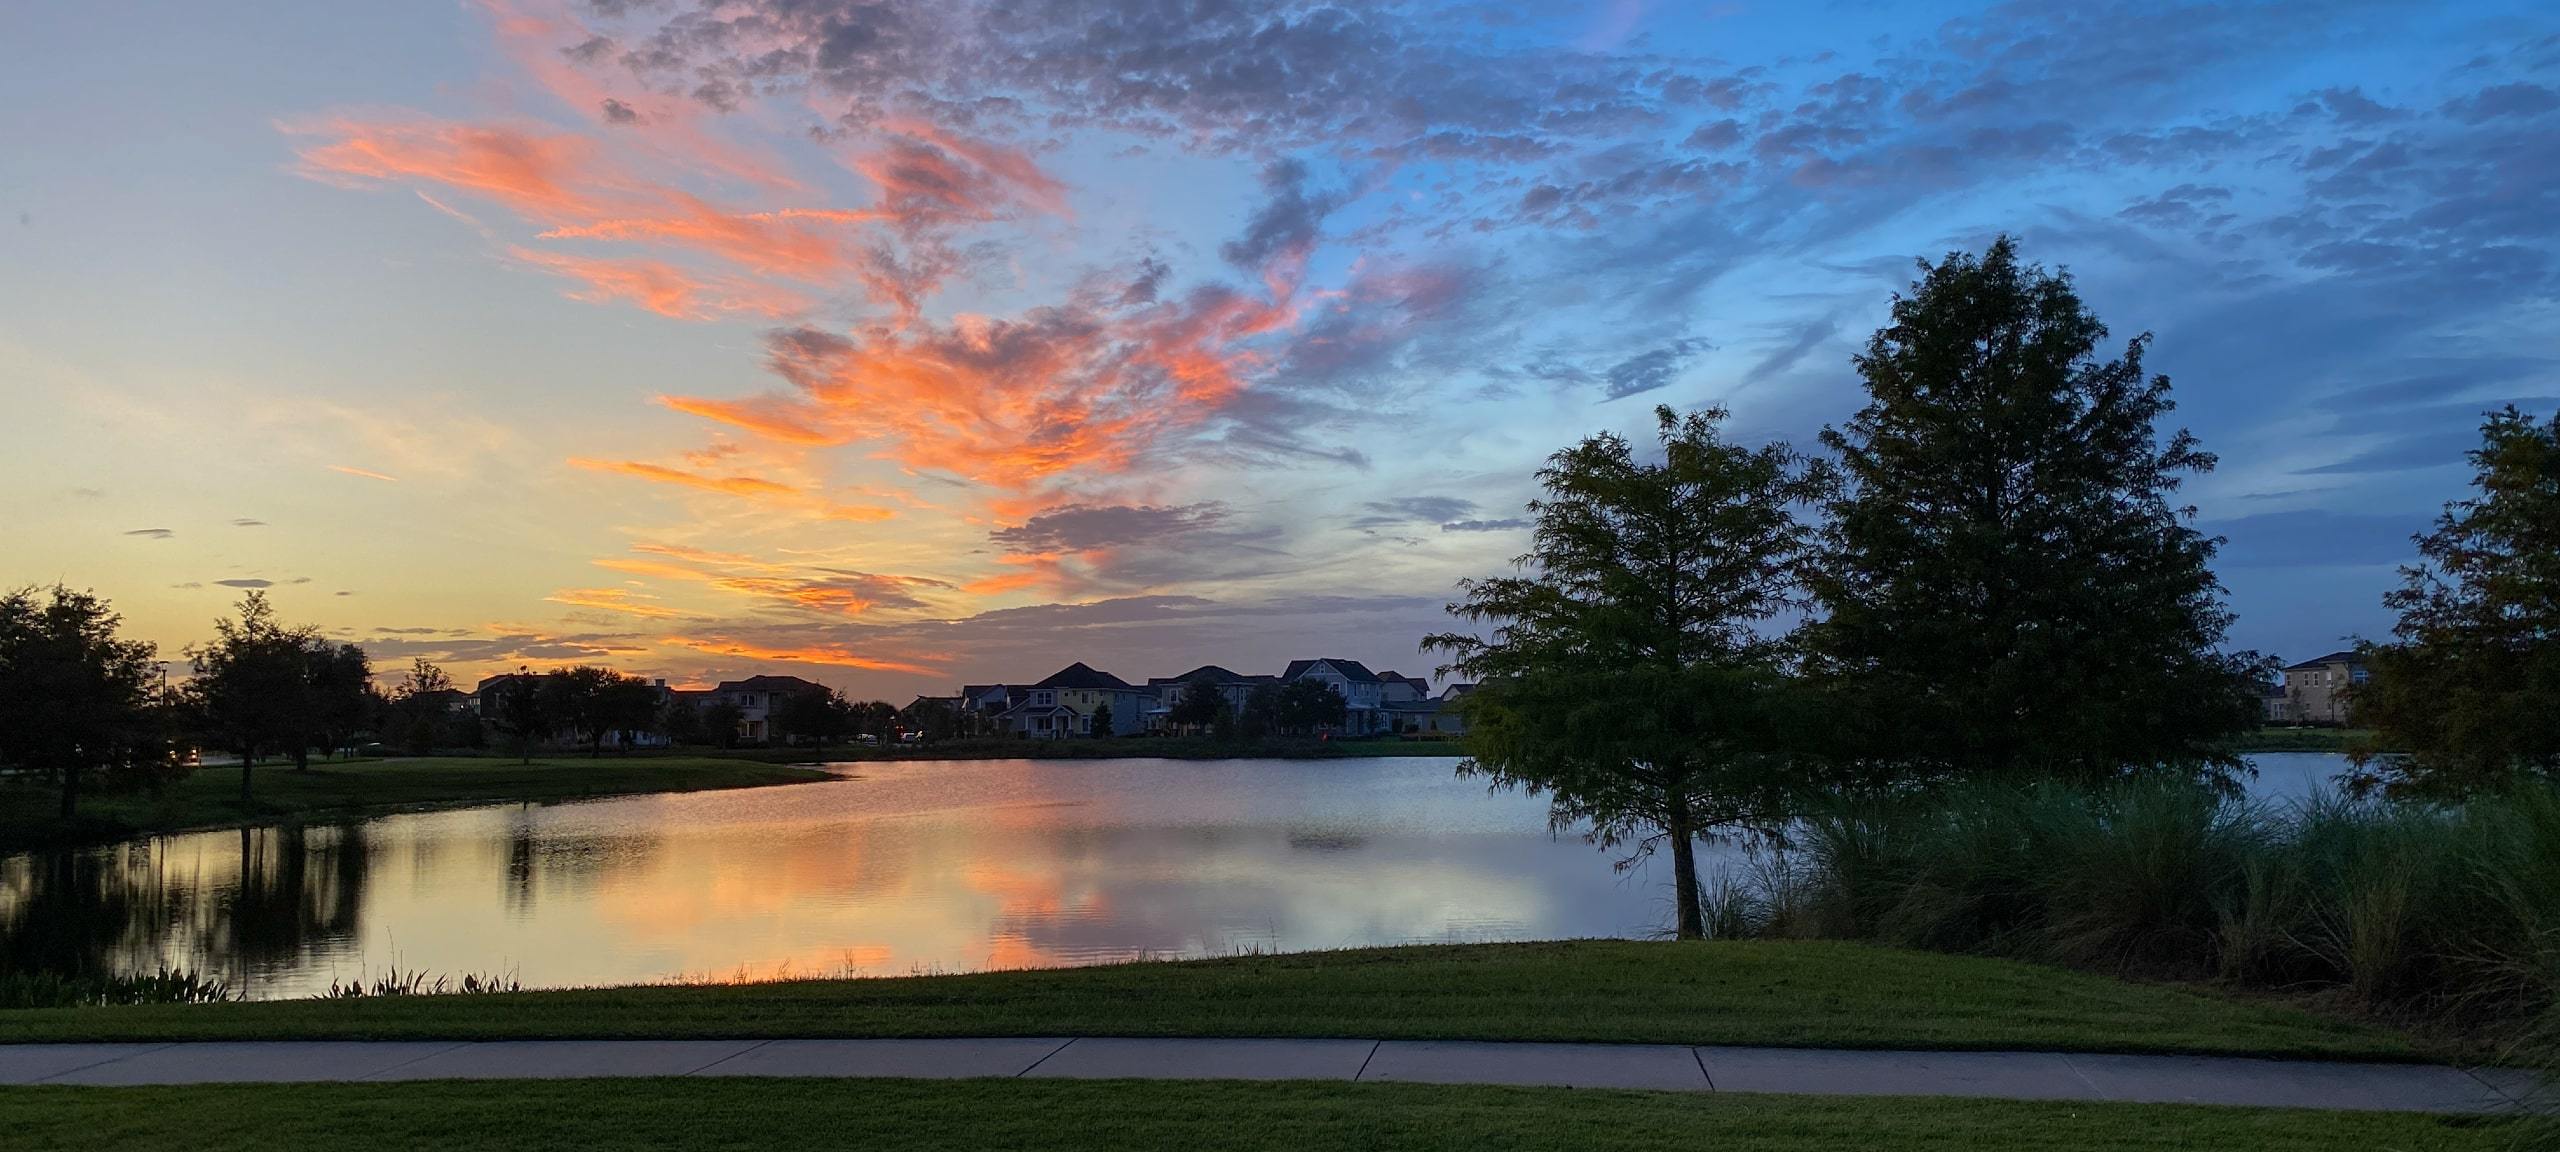 Sunset over pond in Orlando, Florida neighborhood with homes in distance